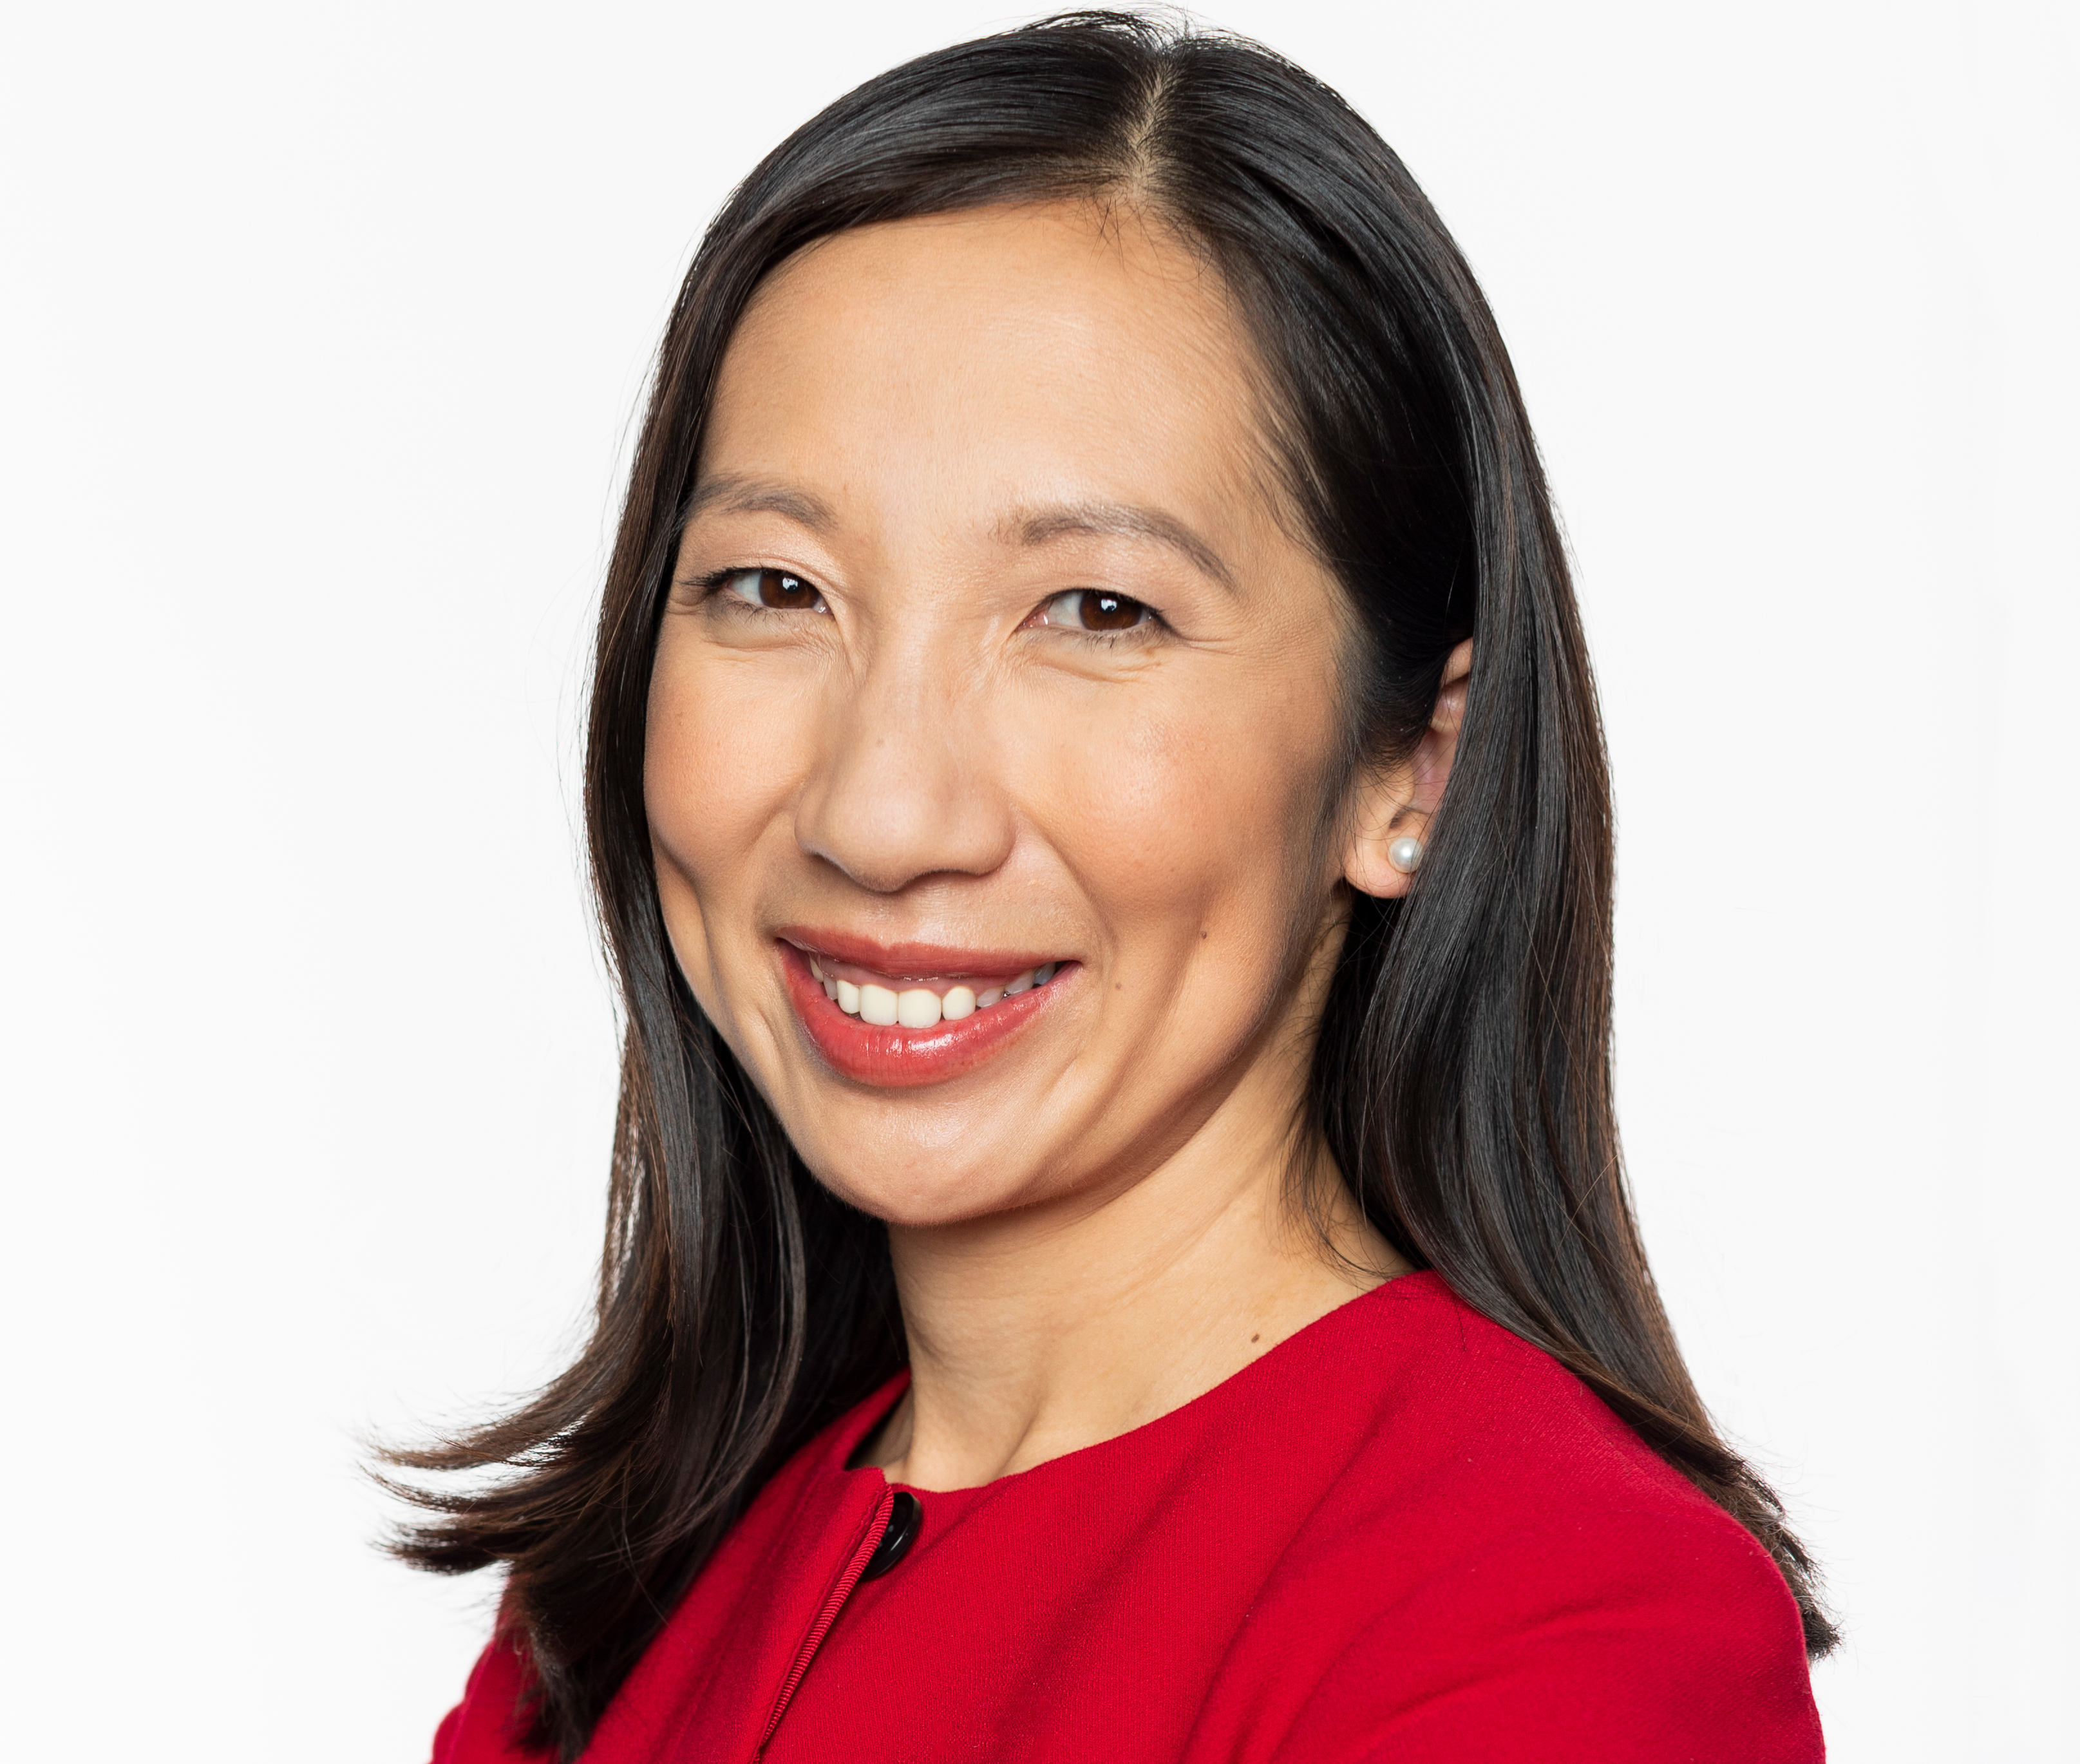 Healthwatch, with Dr. Leana Wen: Fentanyl crisis, new COVID variant